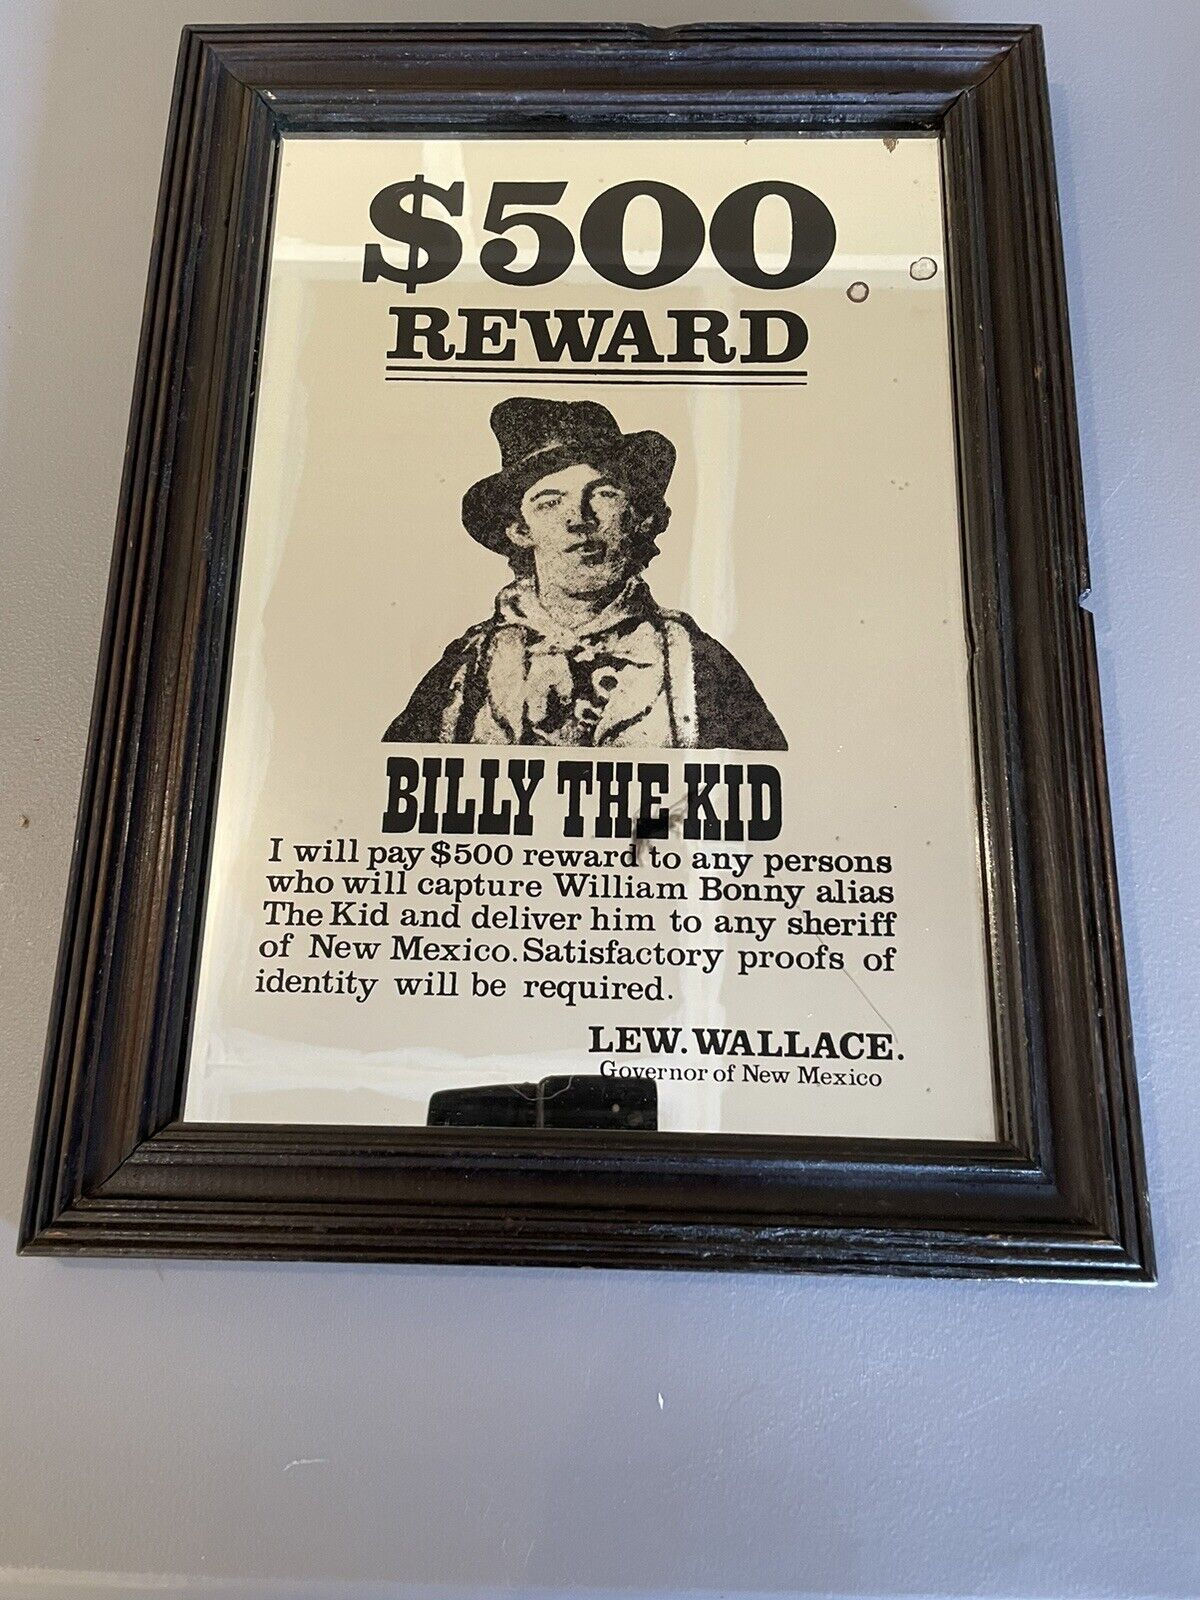 VERY RARE BILLY THE KID $500 REWARD WANTED FRAMED MIRROR SIGN Vintage.